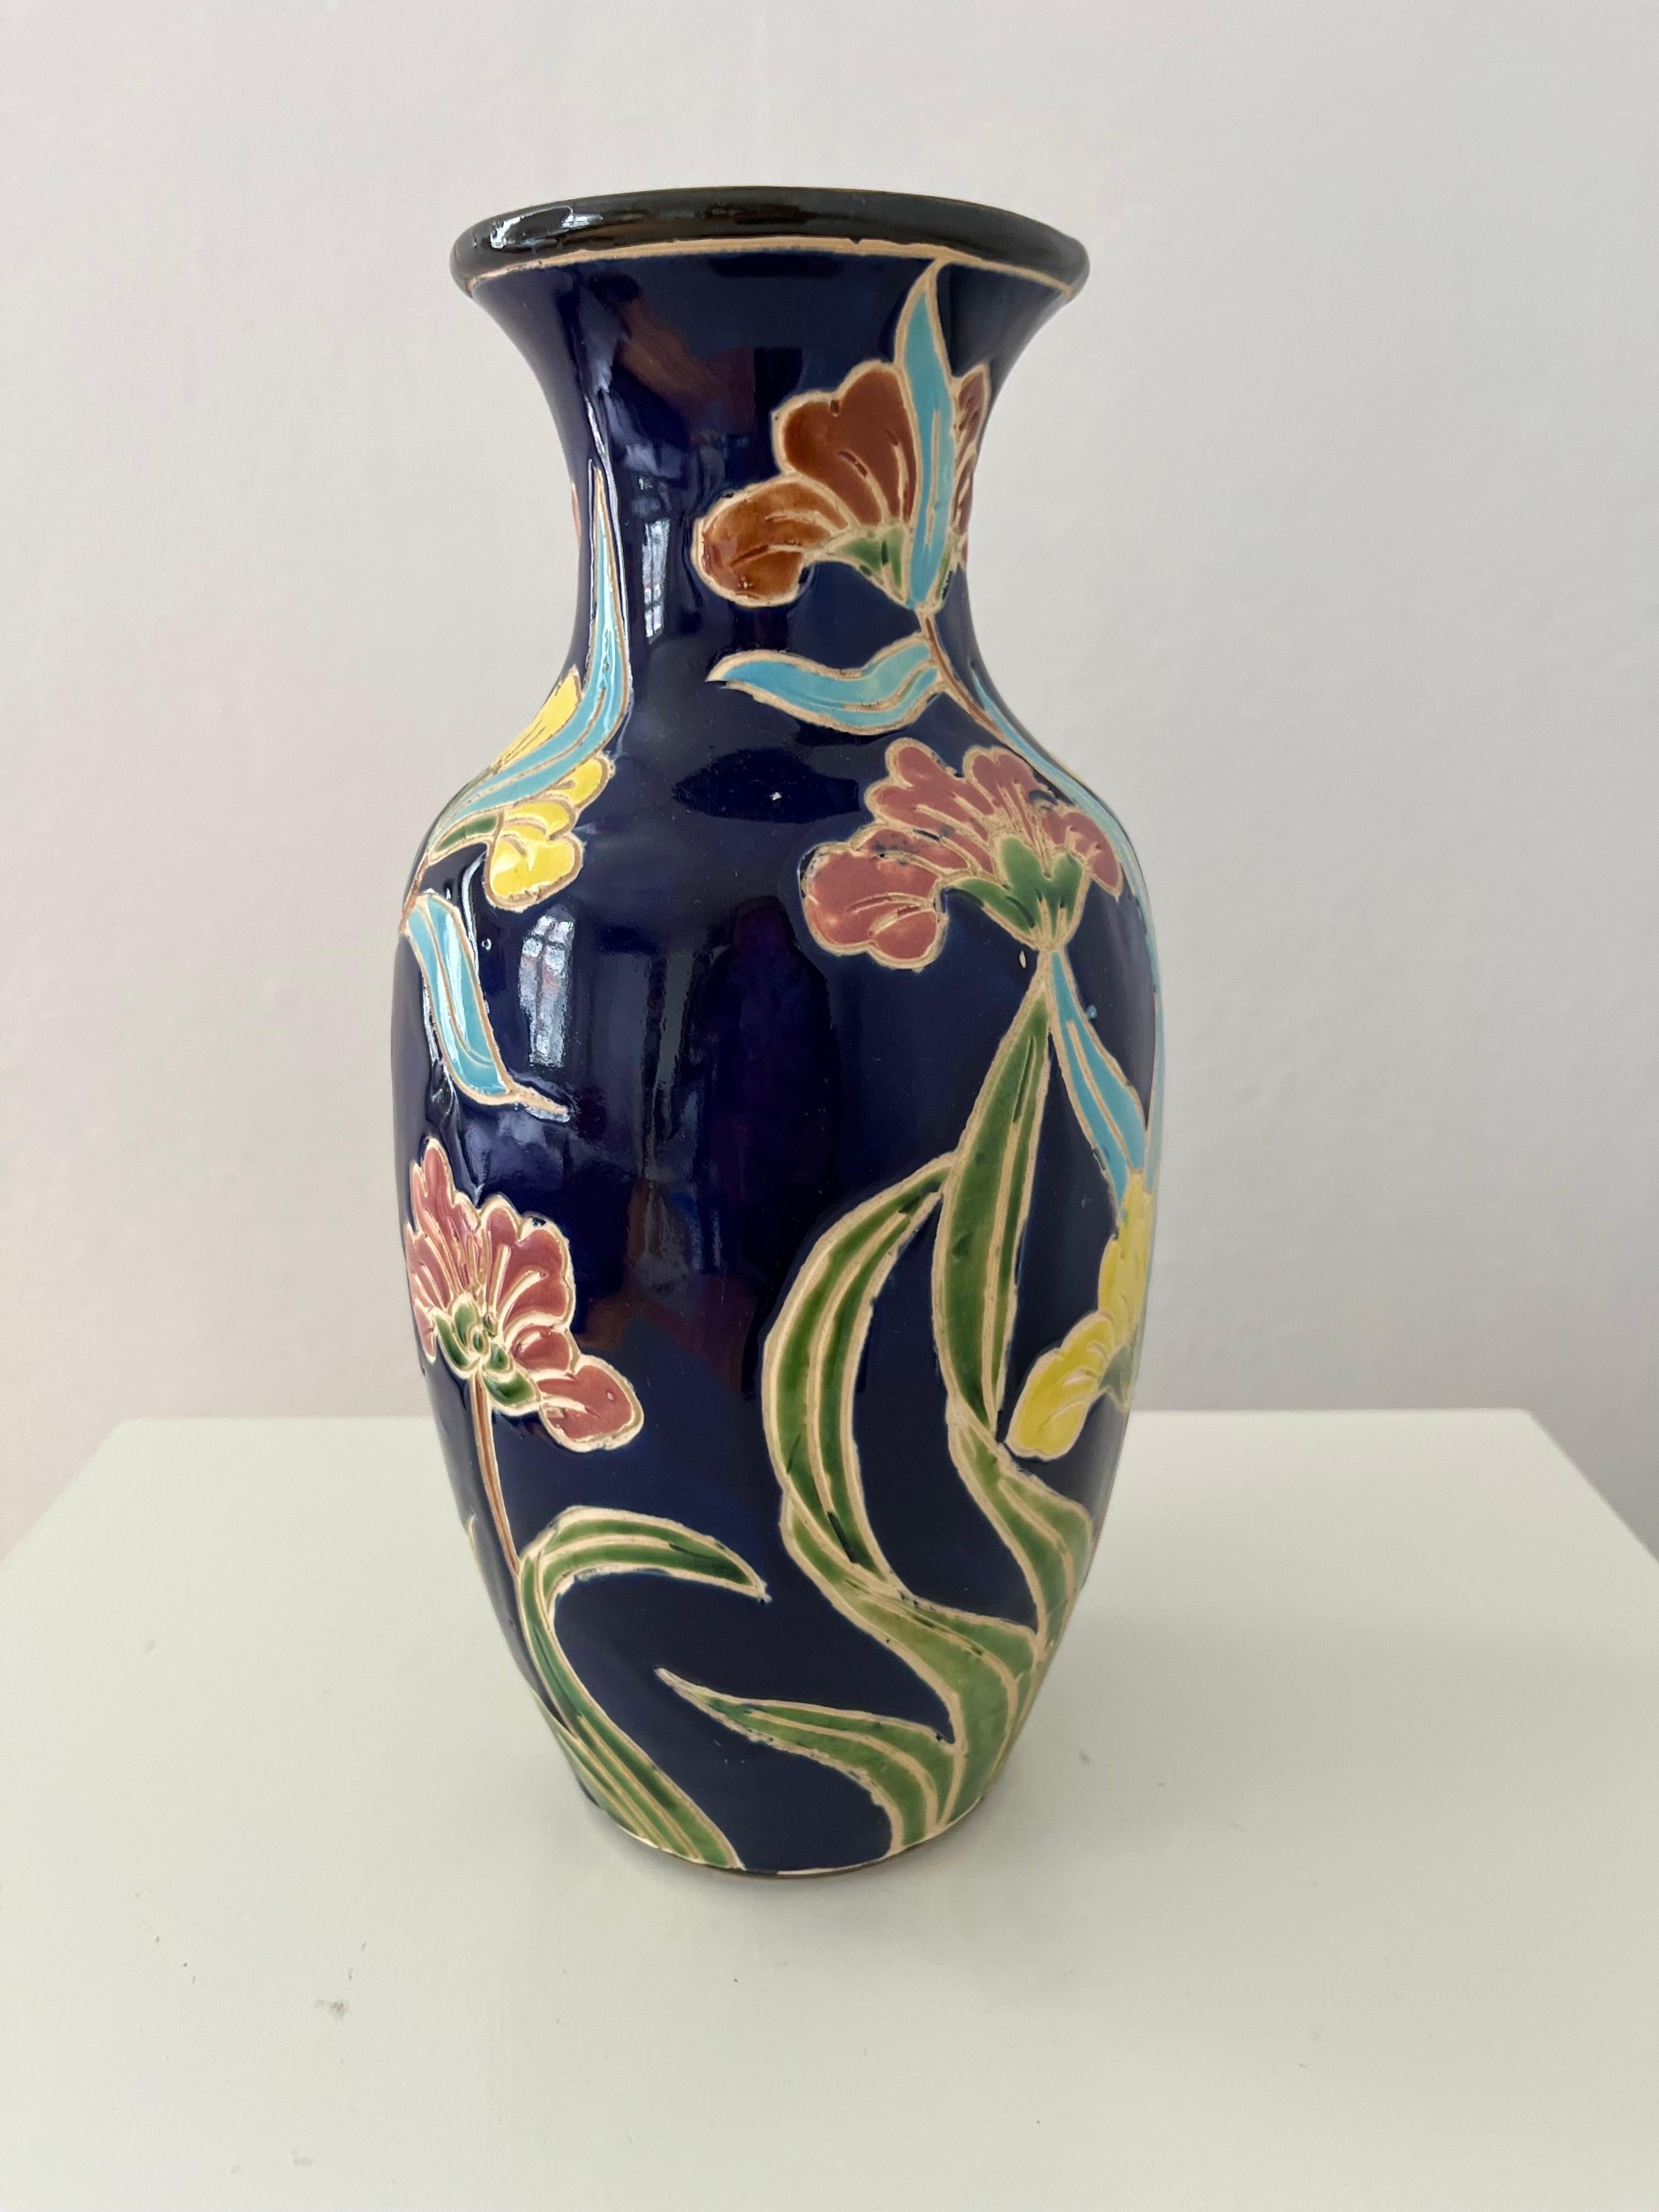 1960s/1970s Scandinavian Organic Modern Ceramic Vase with Colorful Floral Motifs In Good Condition For Sale In Frederiksberg C, DK